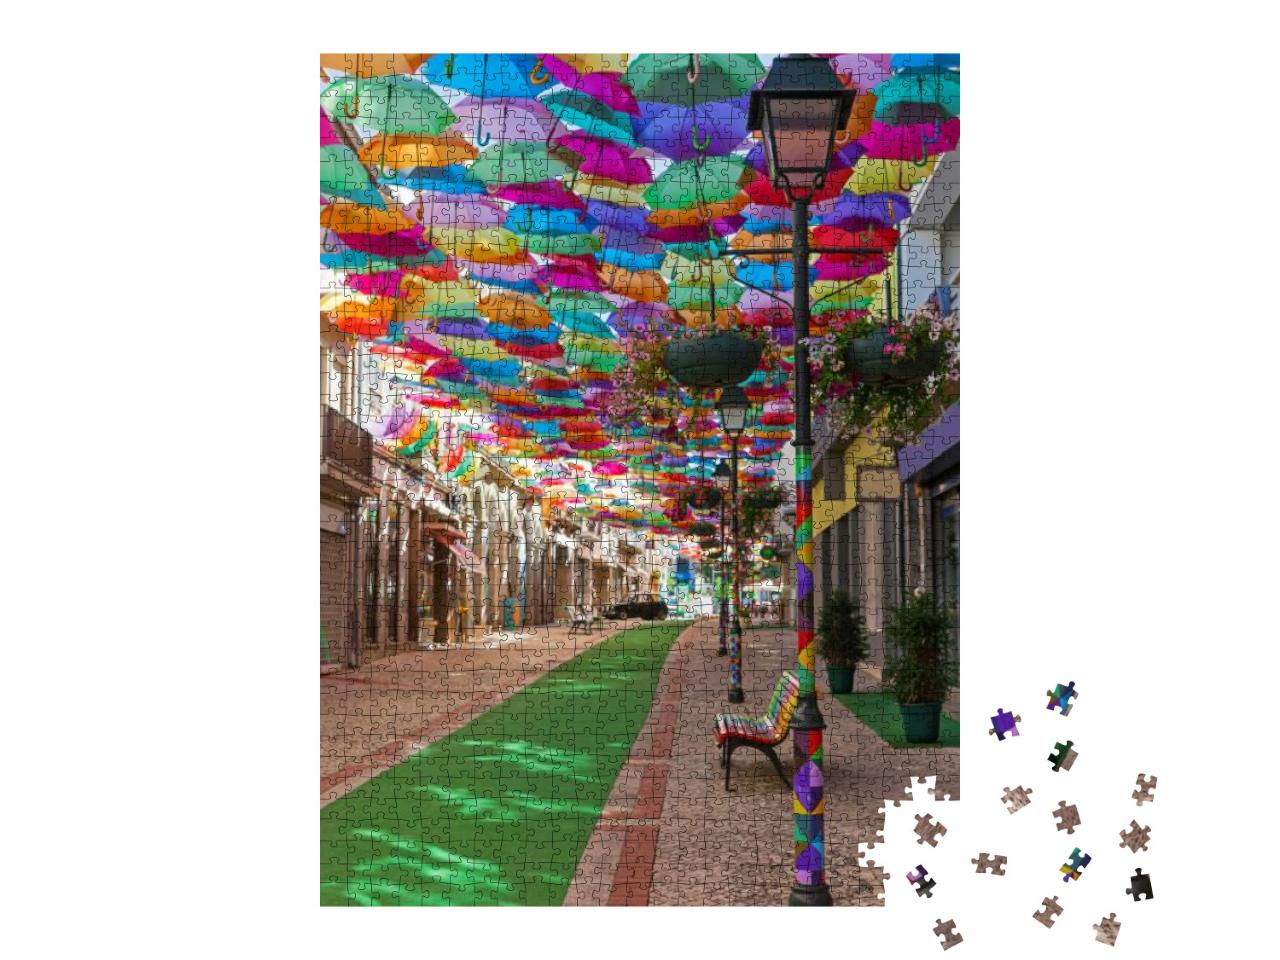 Puzzle 1000 Teile „Umbrella Sky Project in Agueda, Portugal“